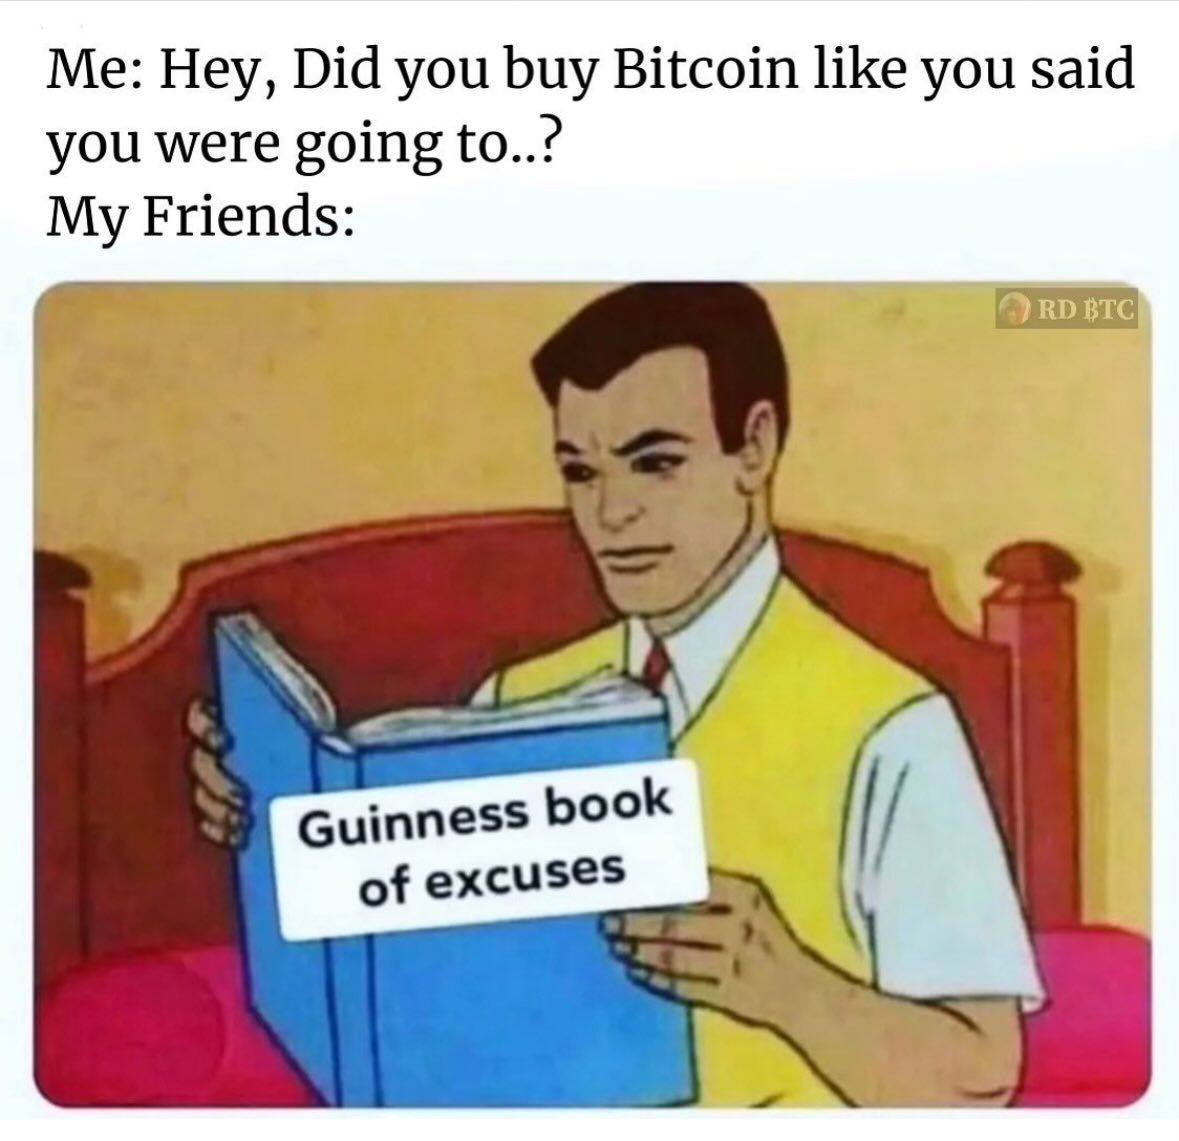 Me: Hey, Did you buy Bitcoin like you said
you were going to..?
My Friends:
Guinness book
of excuses
RD BTC